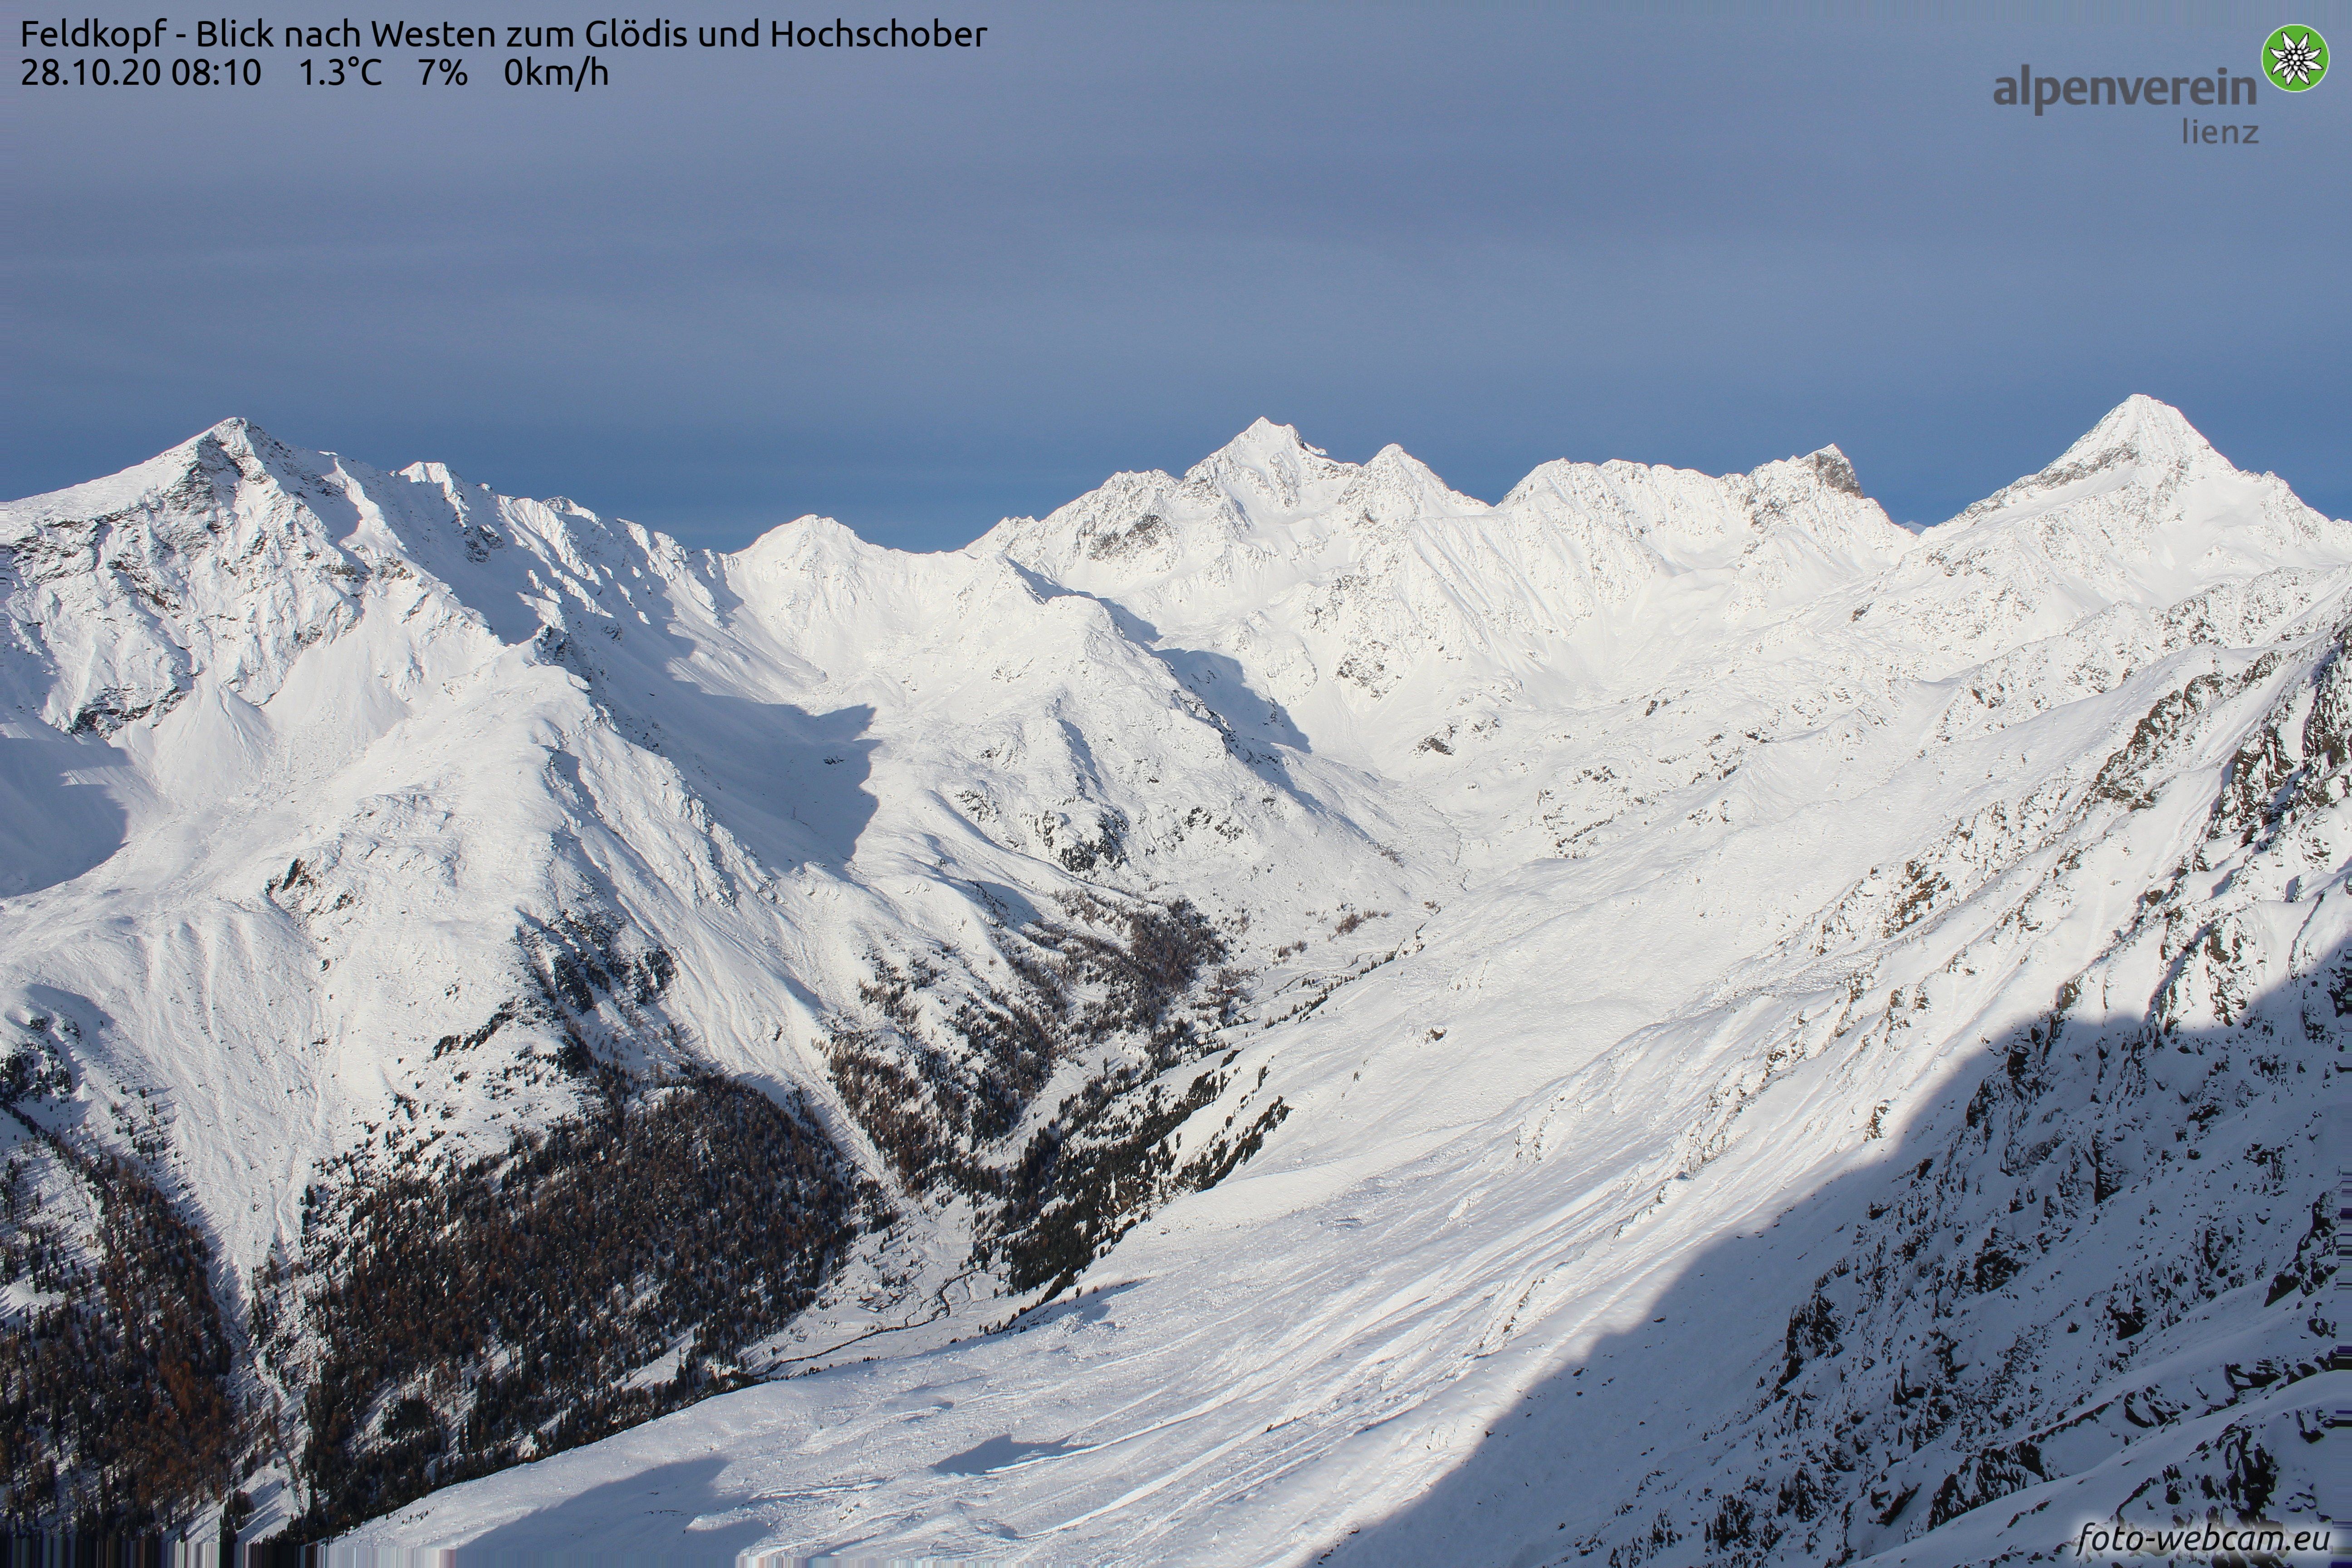 Last week Osttirol (here with a view of the Glödis (3206m) near Lienz) had turned white...